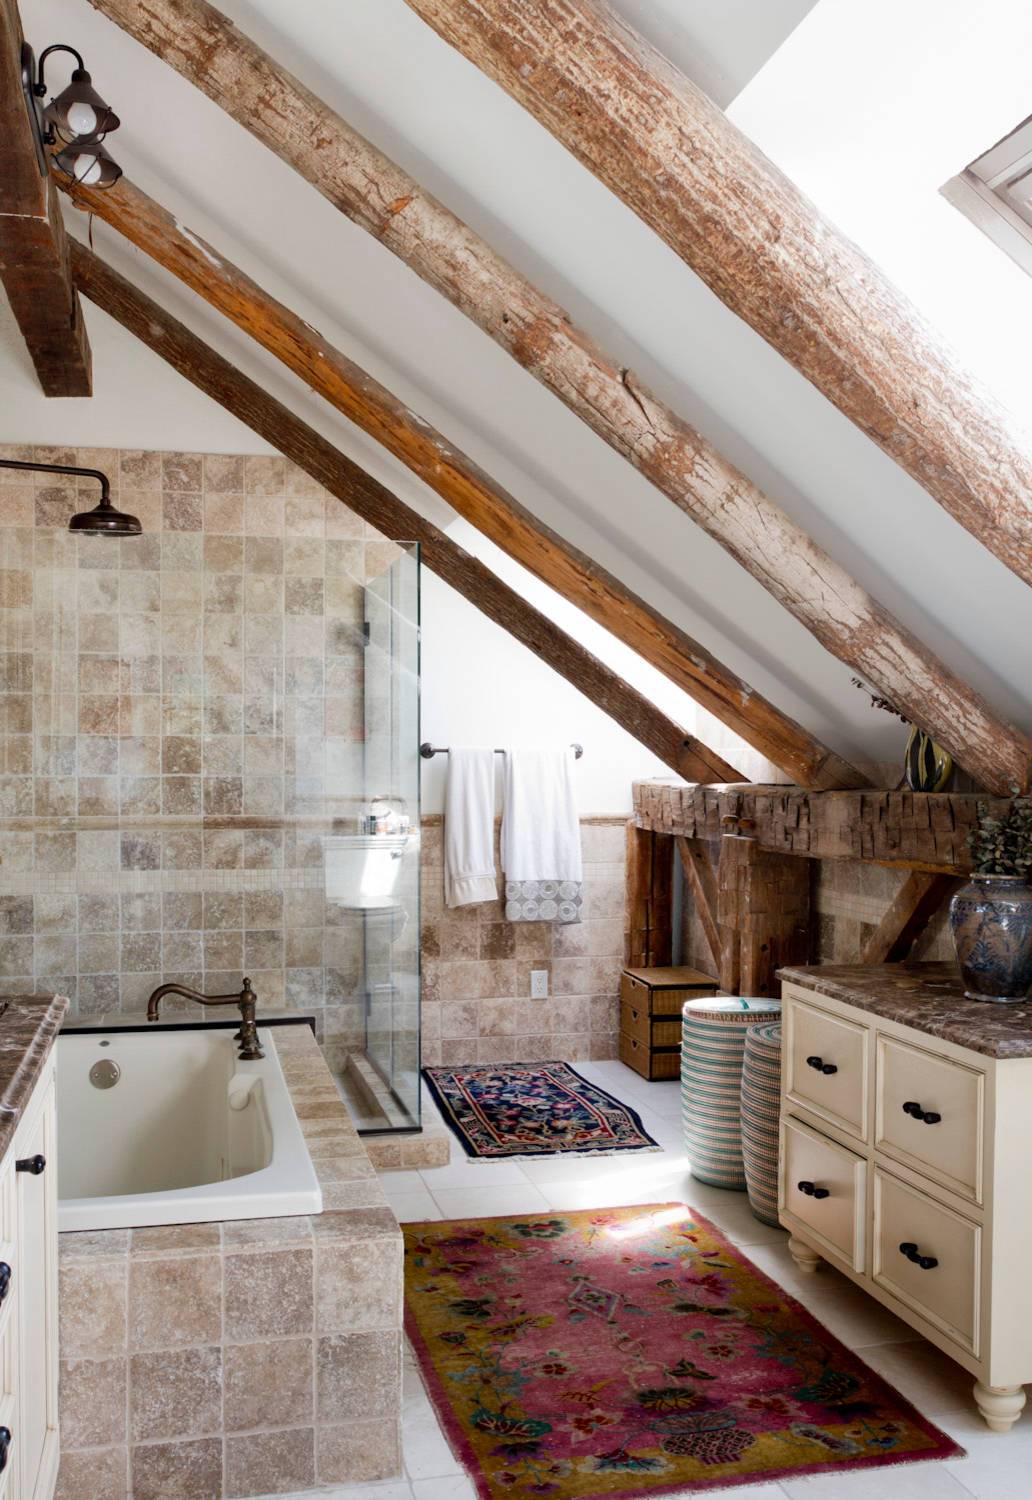 Rustic bathroom (from Houzz)